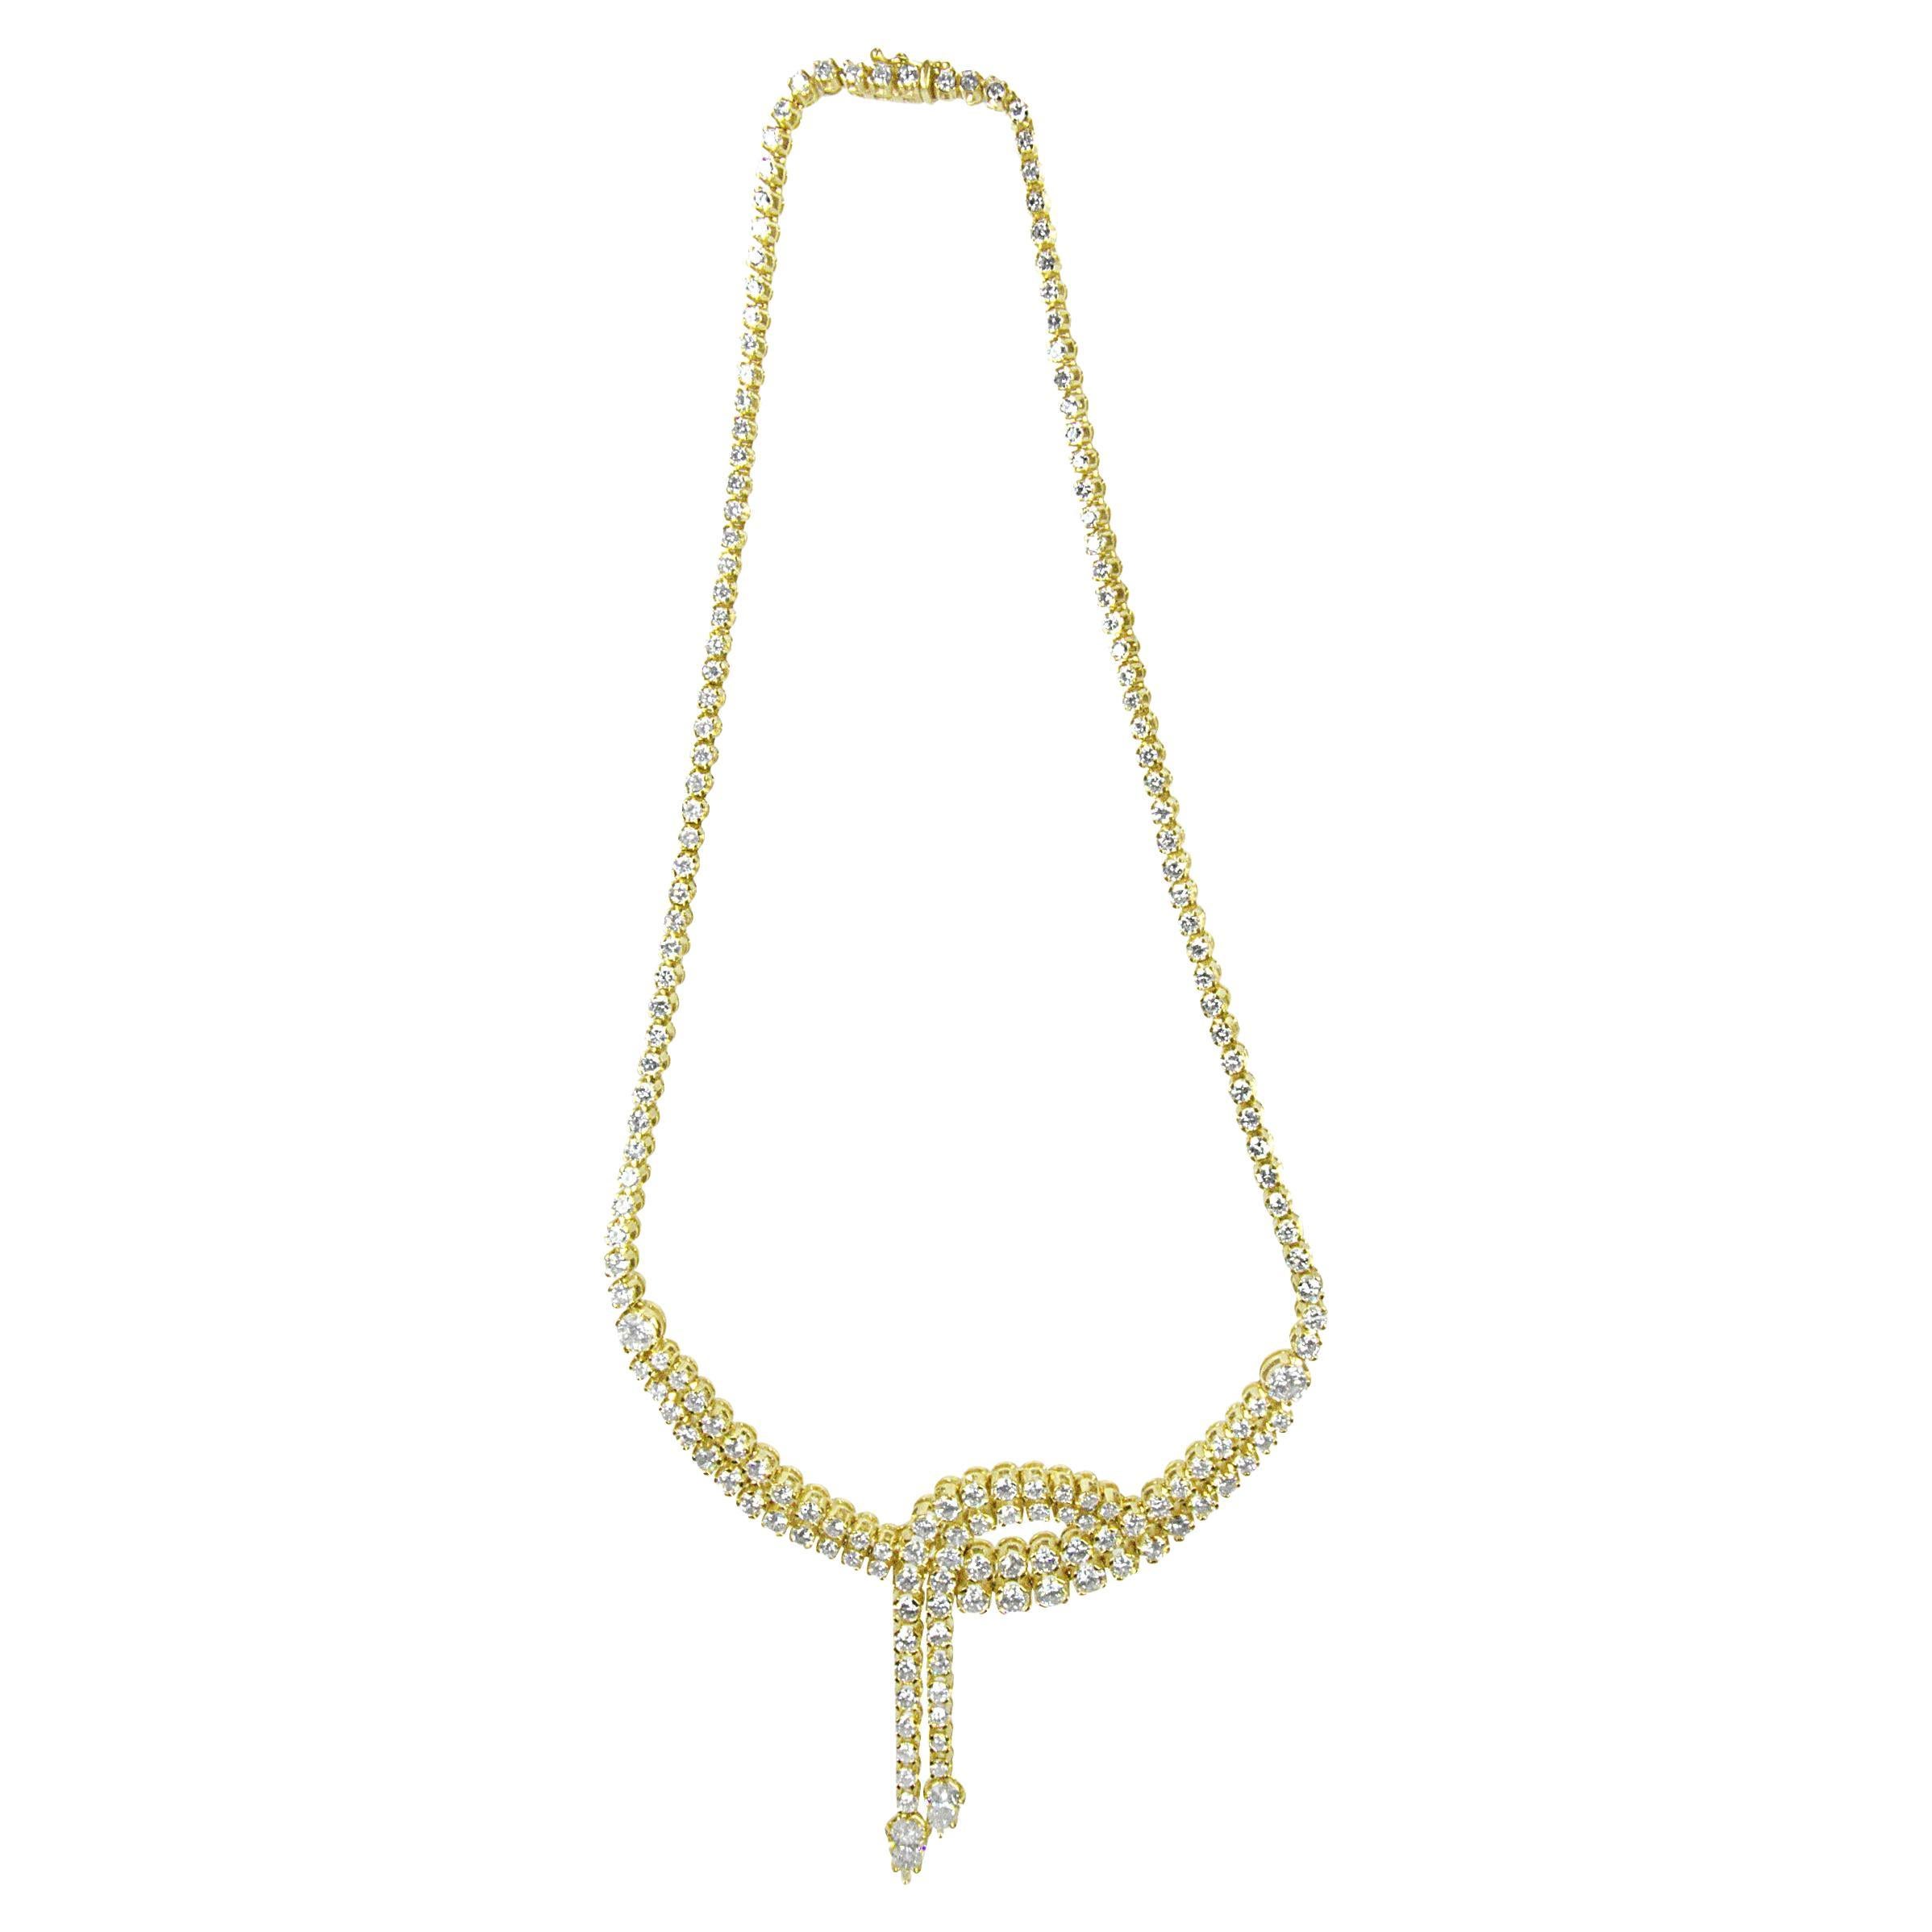 14K Yellow Gold 17.0 Carat Diamond Double Row Lariat Tennis Necklace For Sale